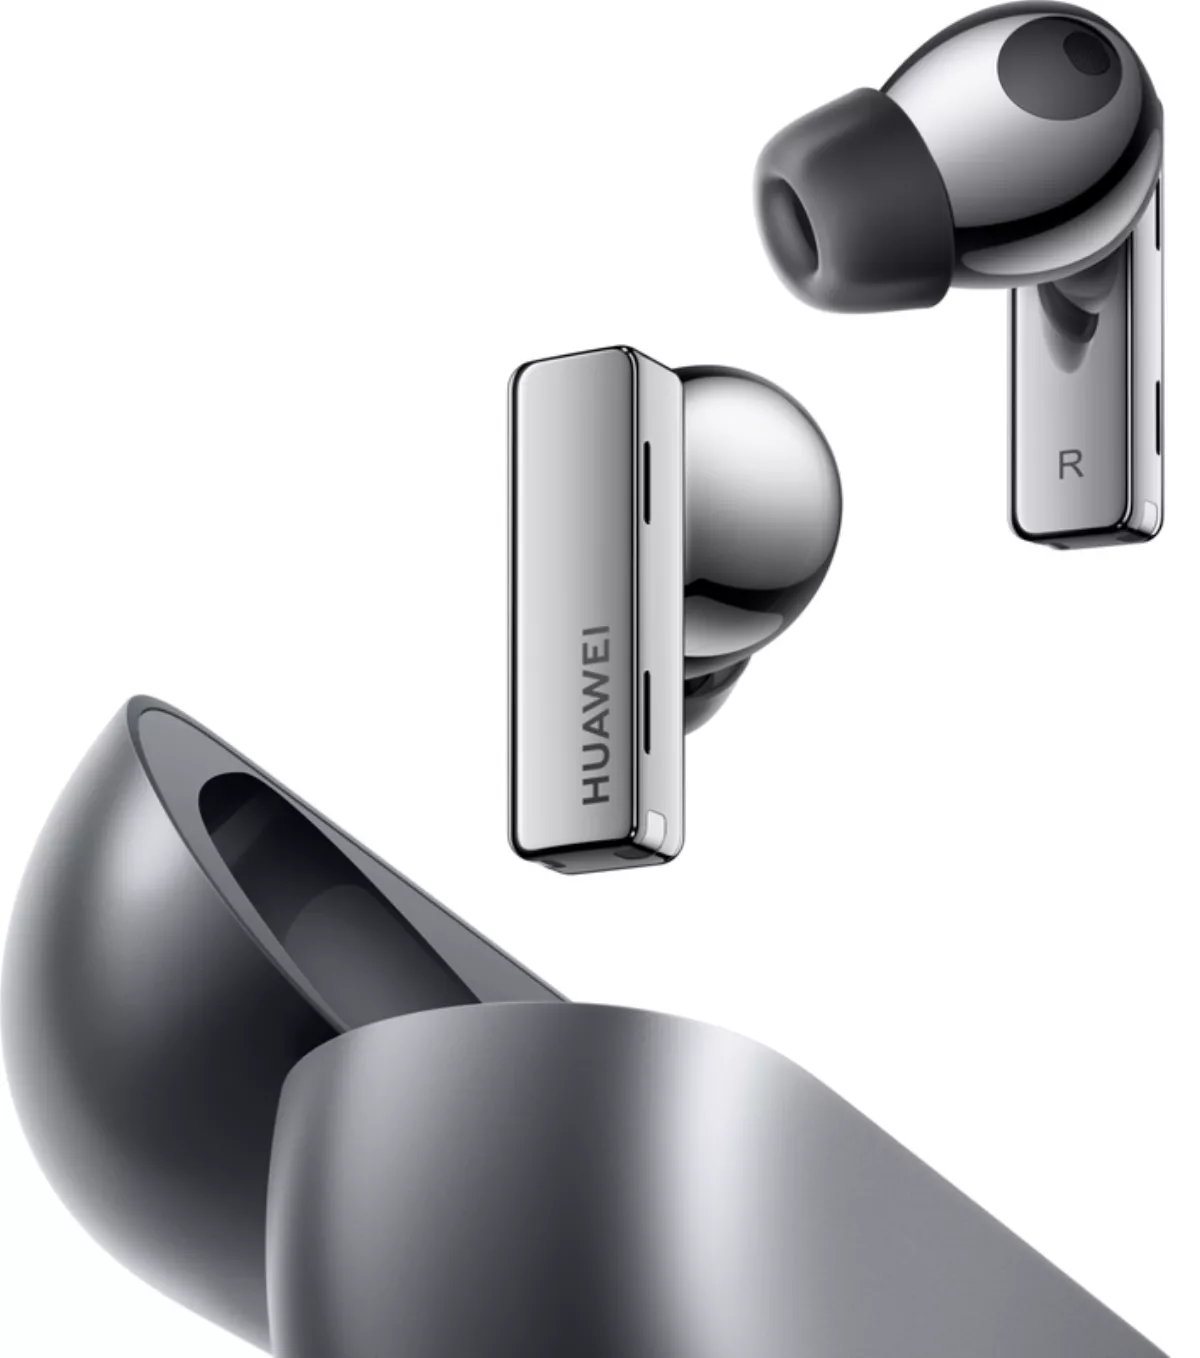 Hands-on review: The Huawei FreeBuds Pro wireless earbuds